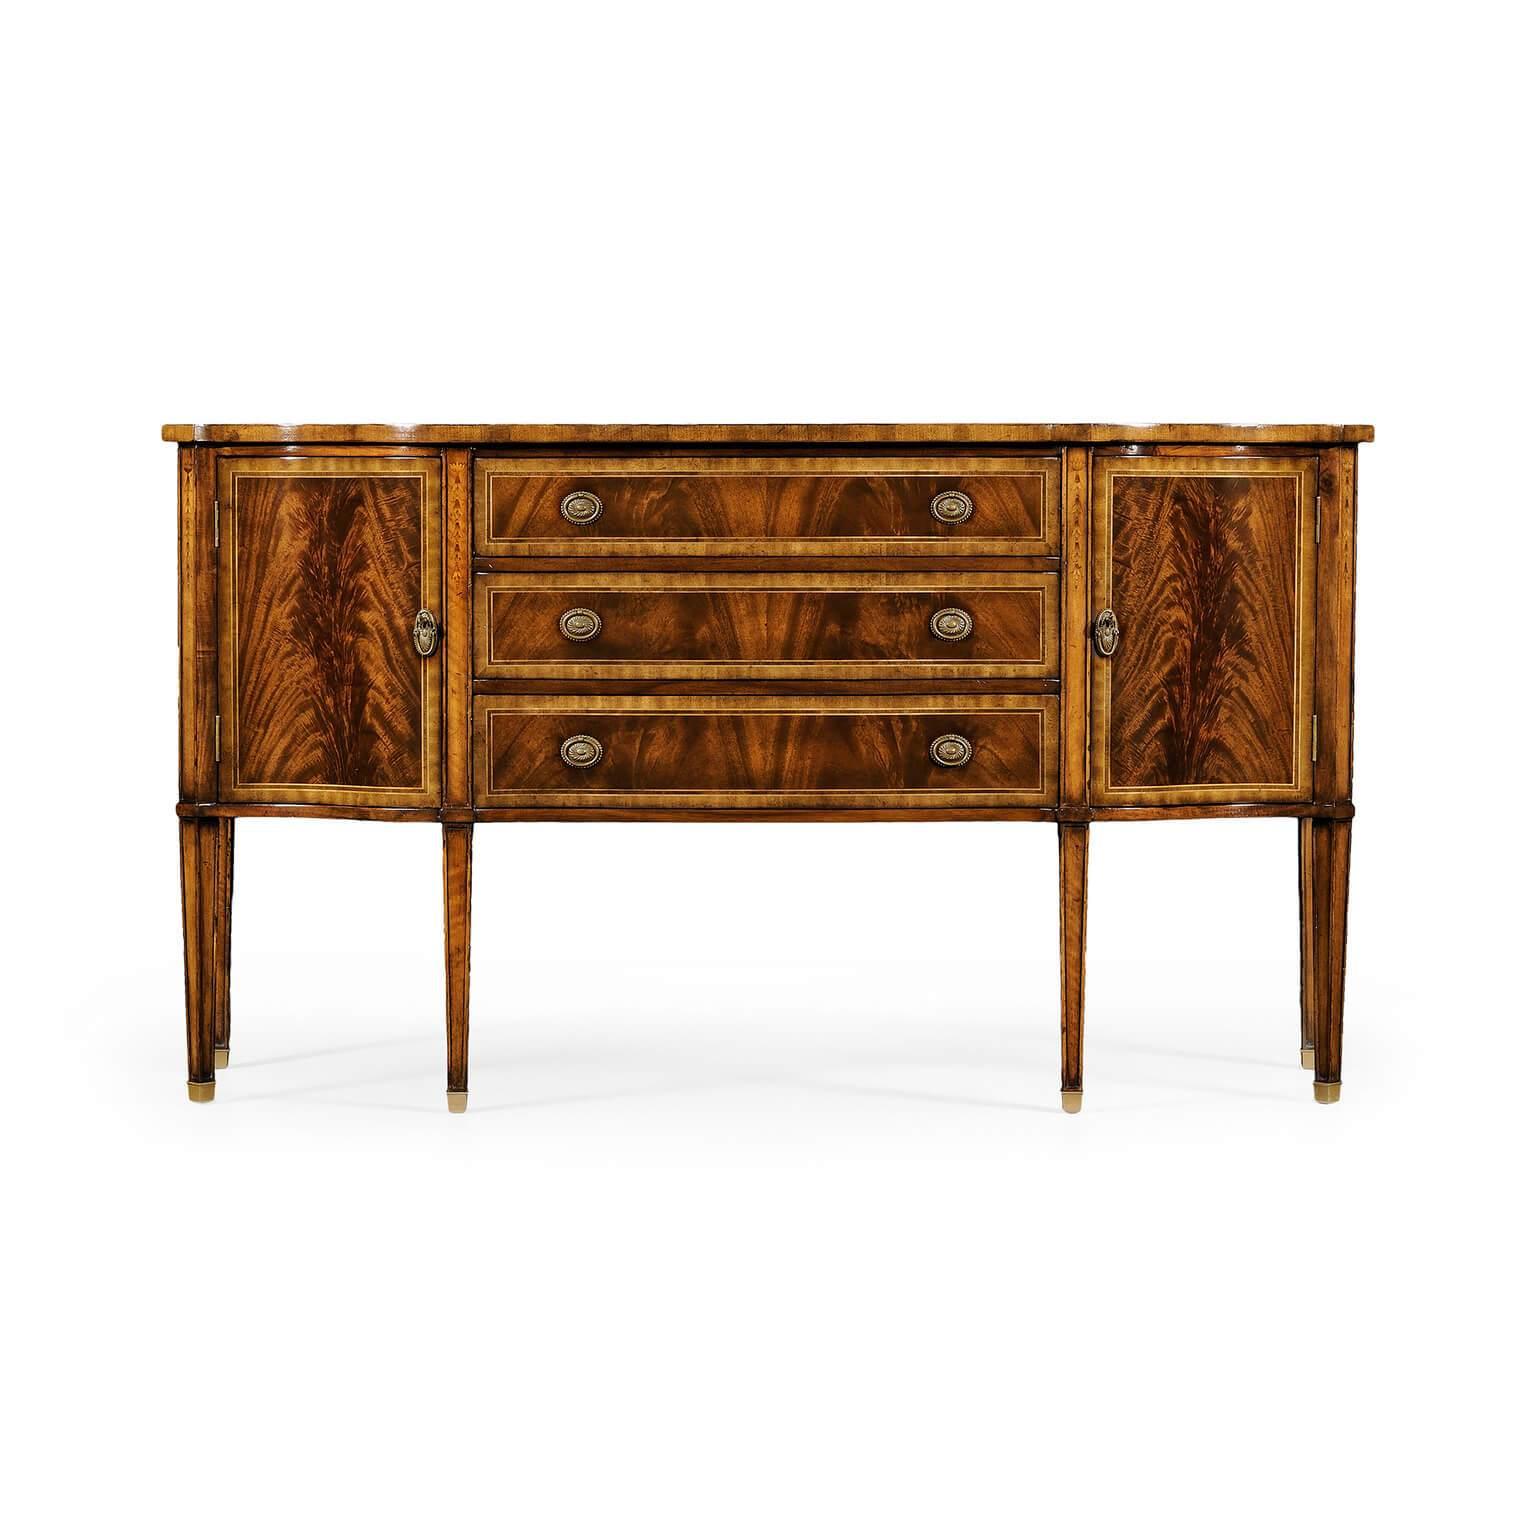 George III style crotch mahogany veneered serpentine sideboard. The breakfront with concave doors to either end and with three drawers to the center. Patinated brass oval handles, fine marquetry detail to the paneled tapered legs and set on brass